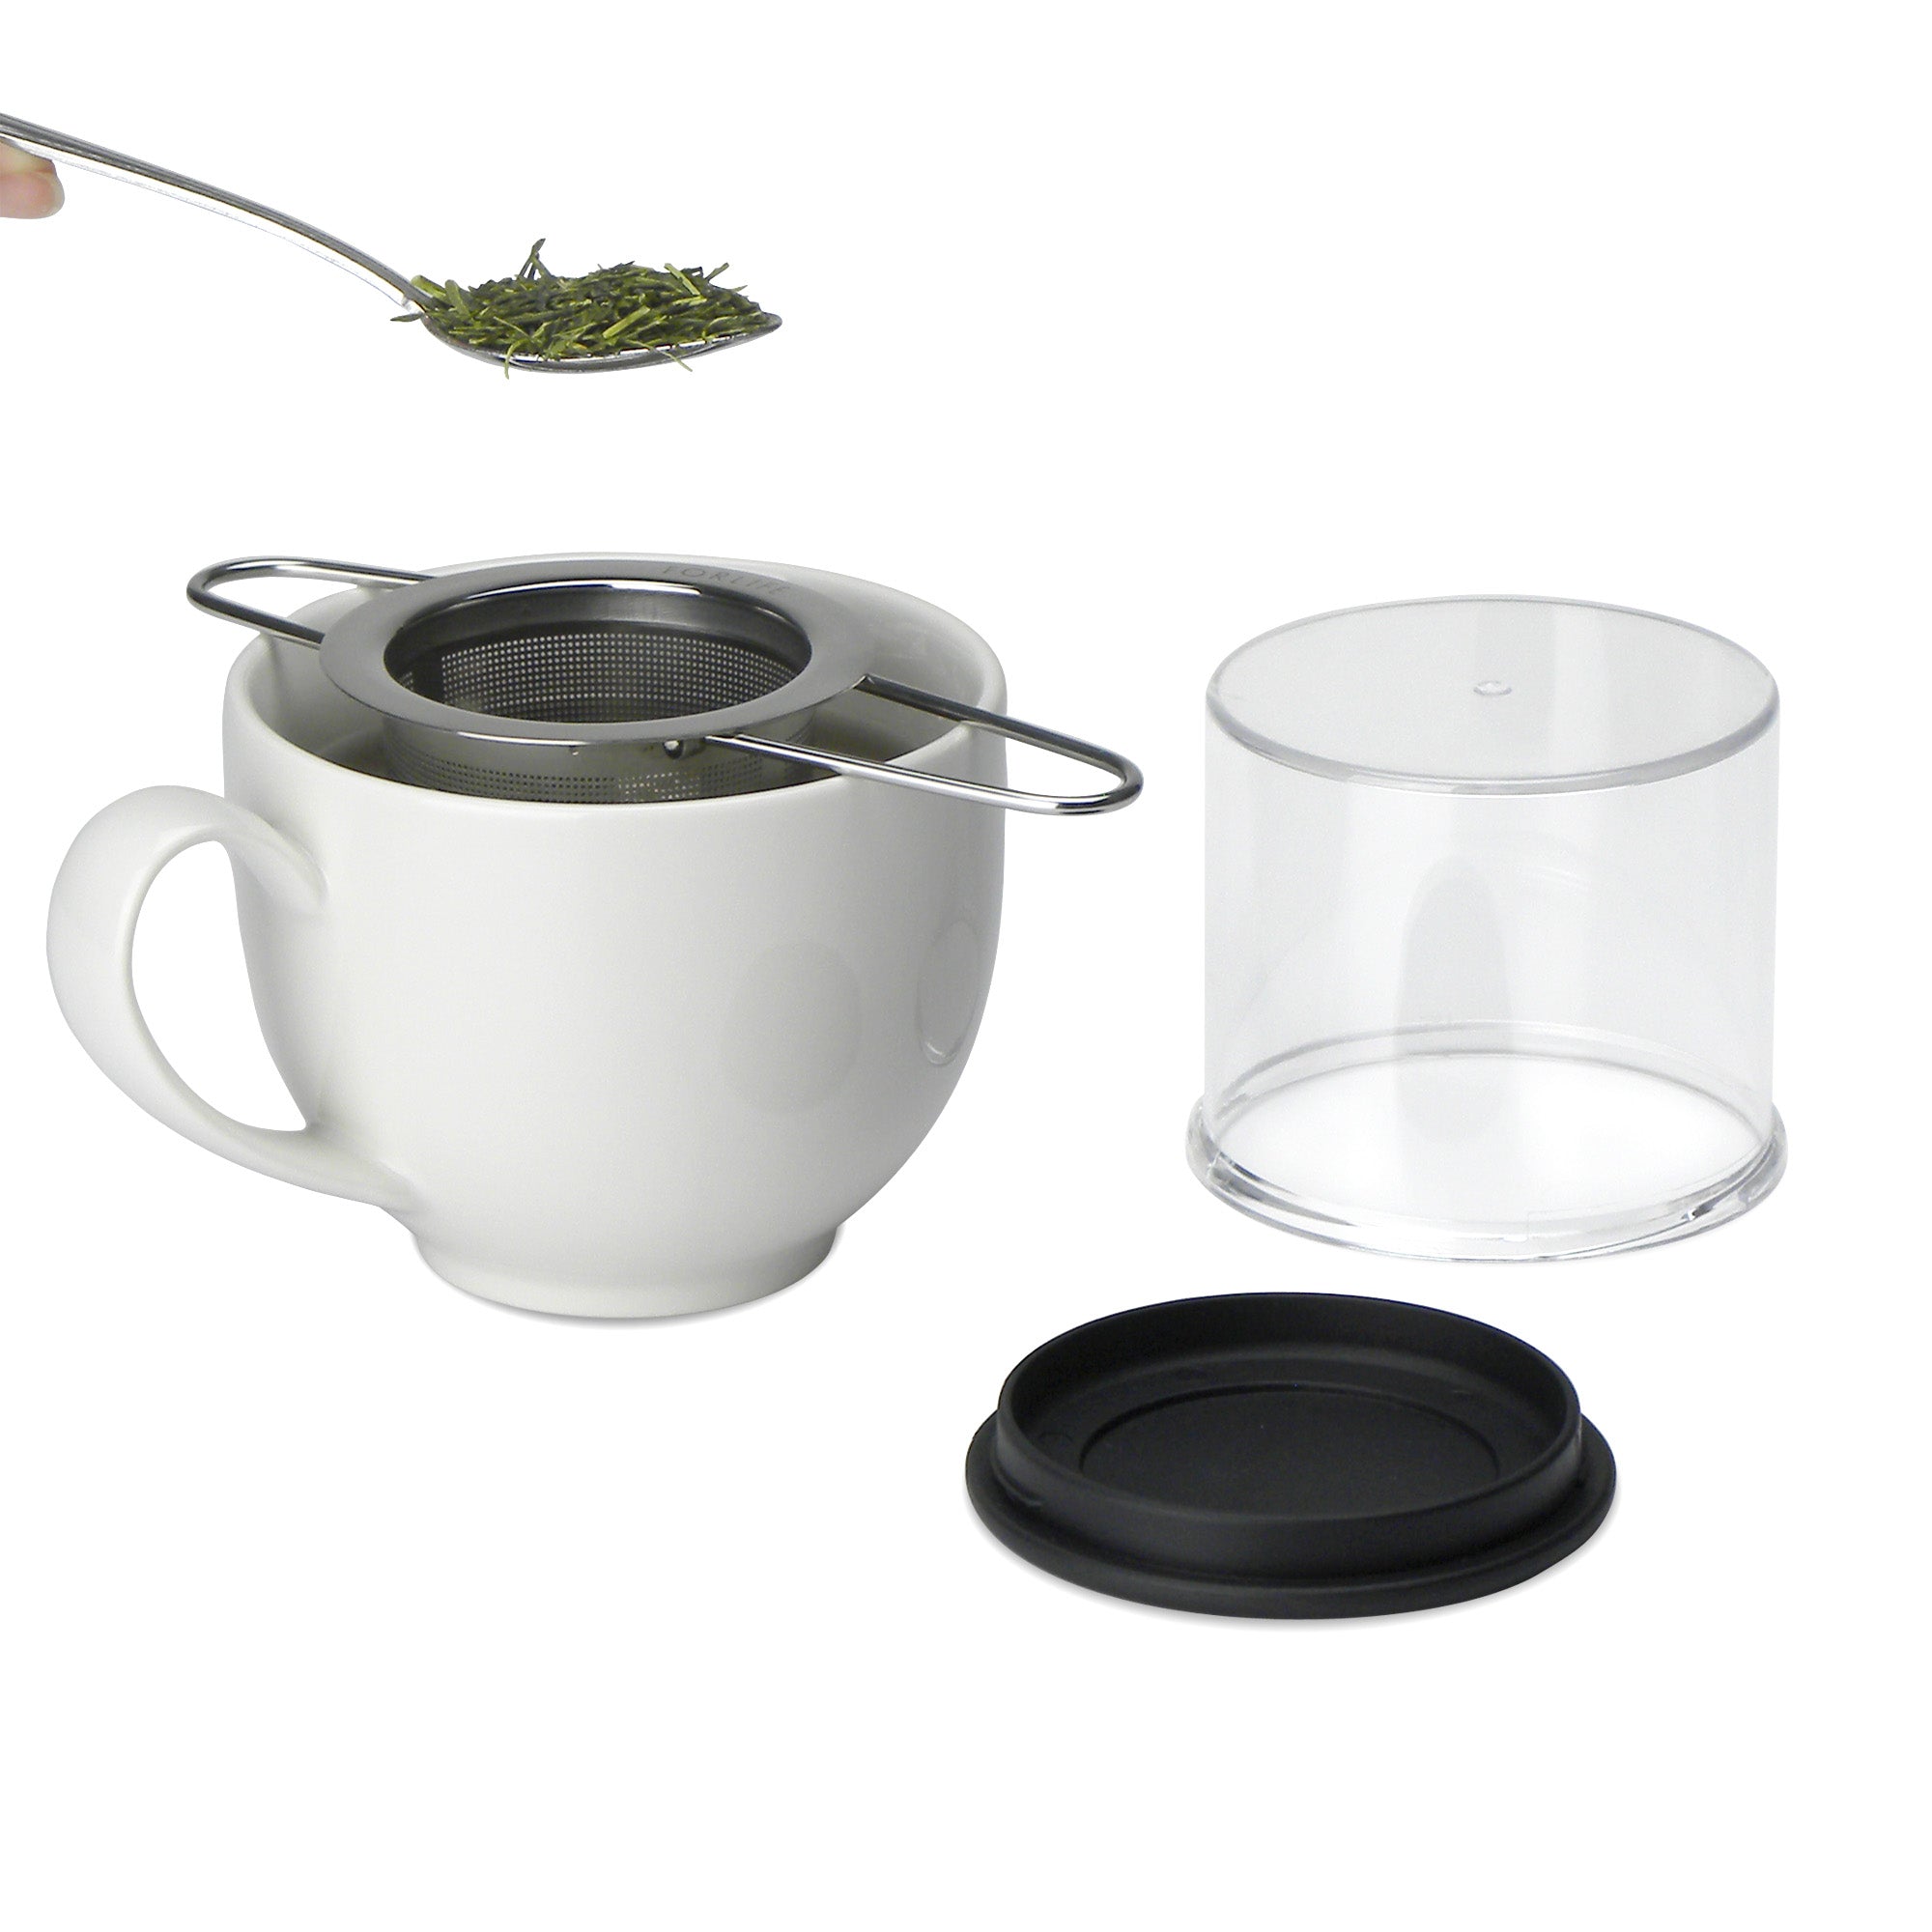 Folding Handle Tea Infuser with Carrying Case